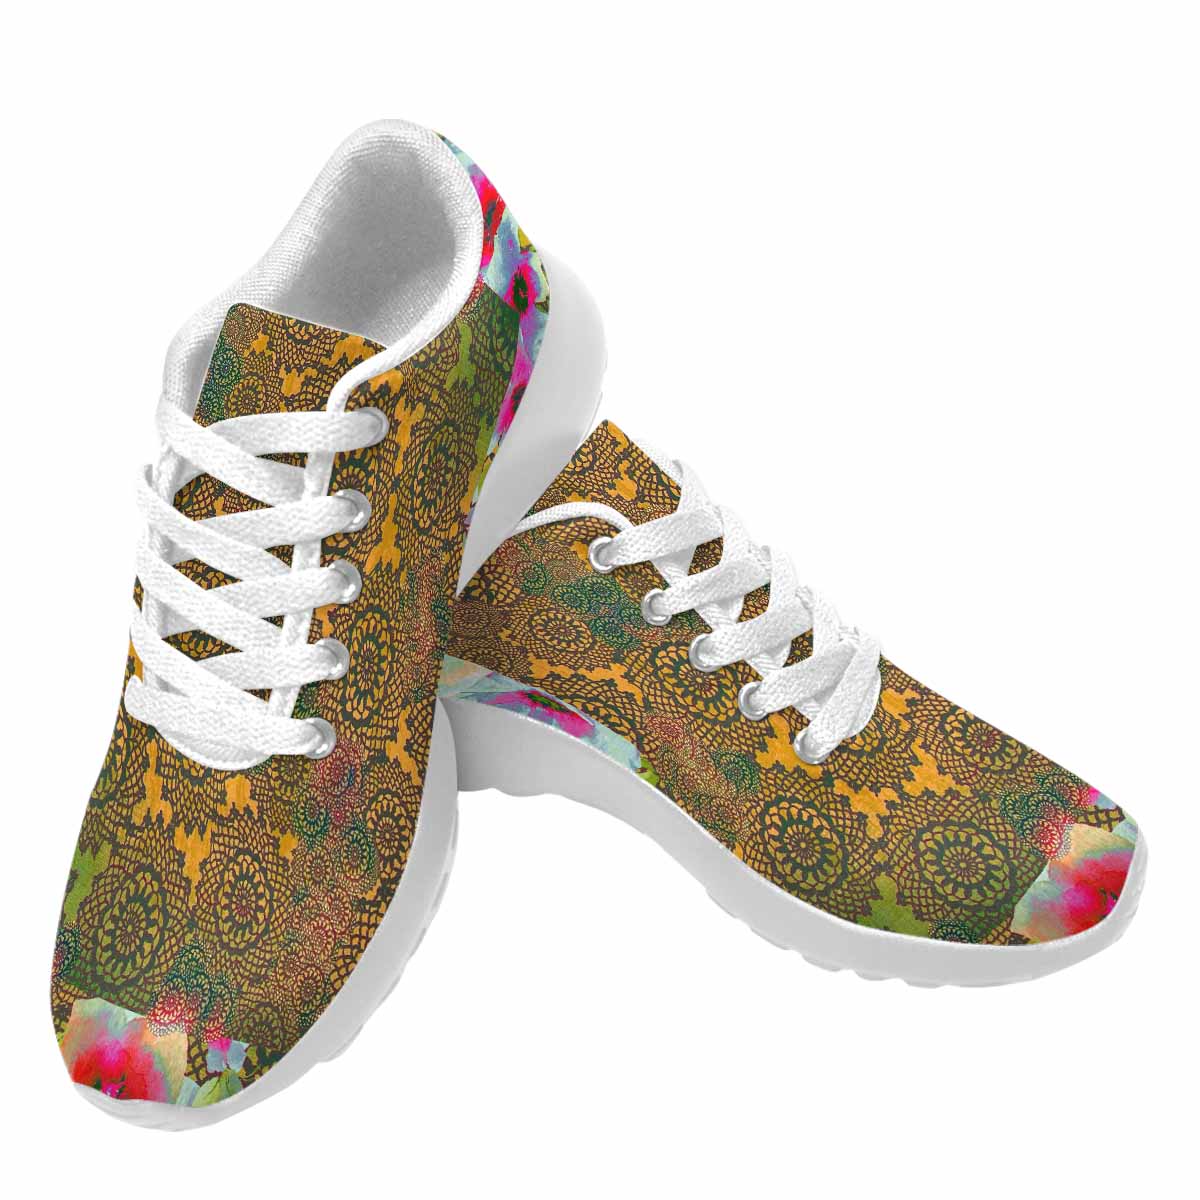 Victorian lace print, womens cute casual or running sneakers, design 15